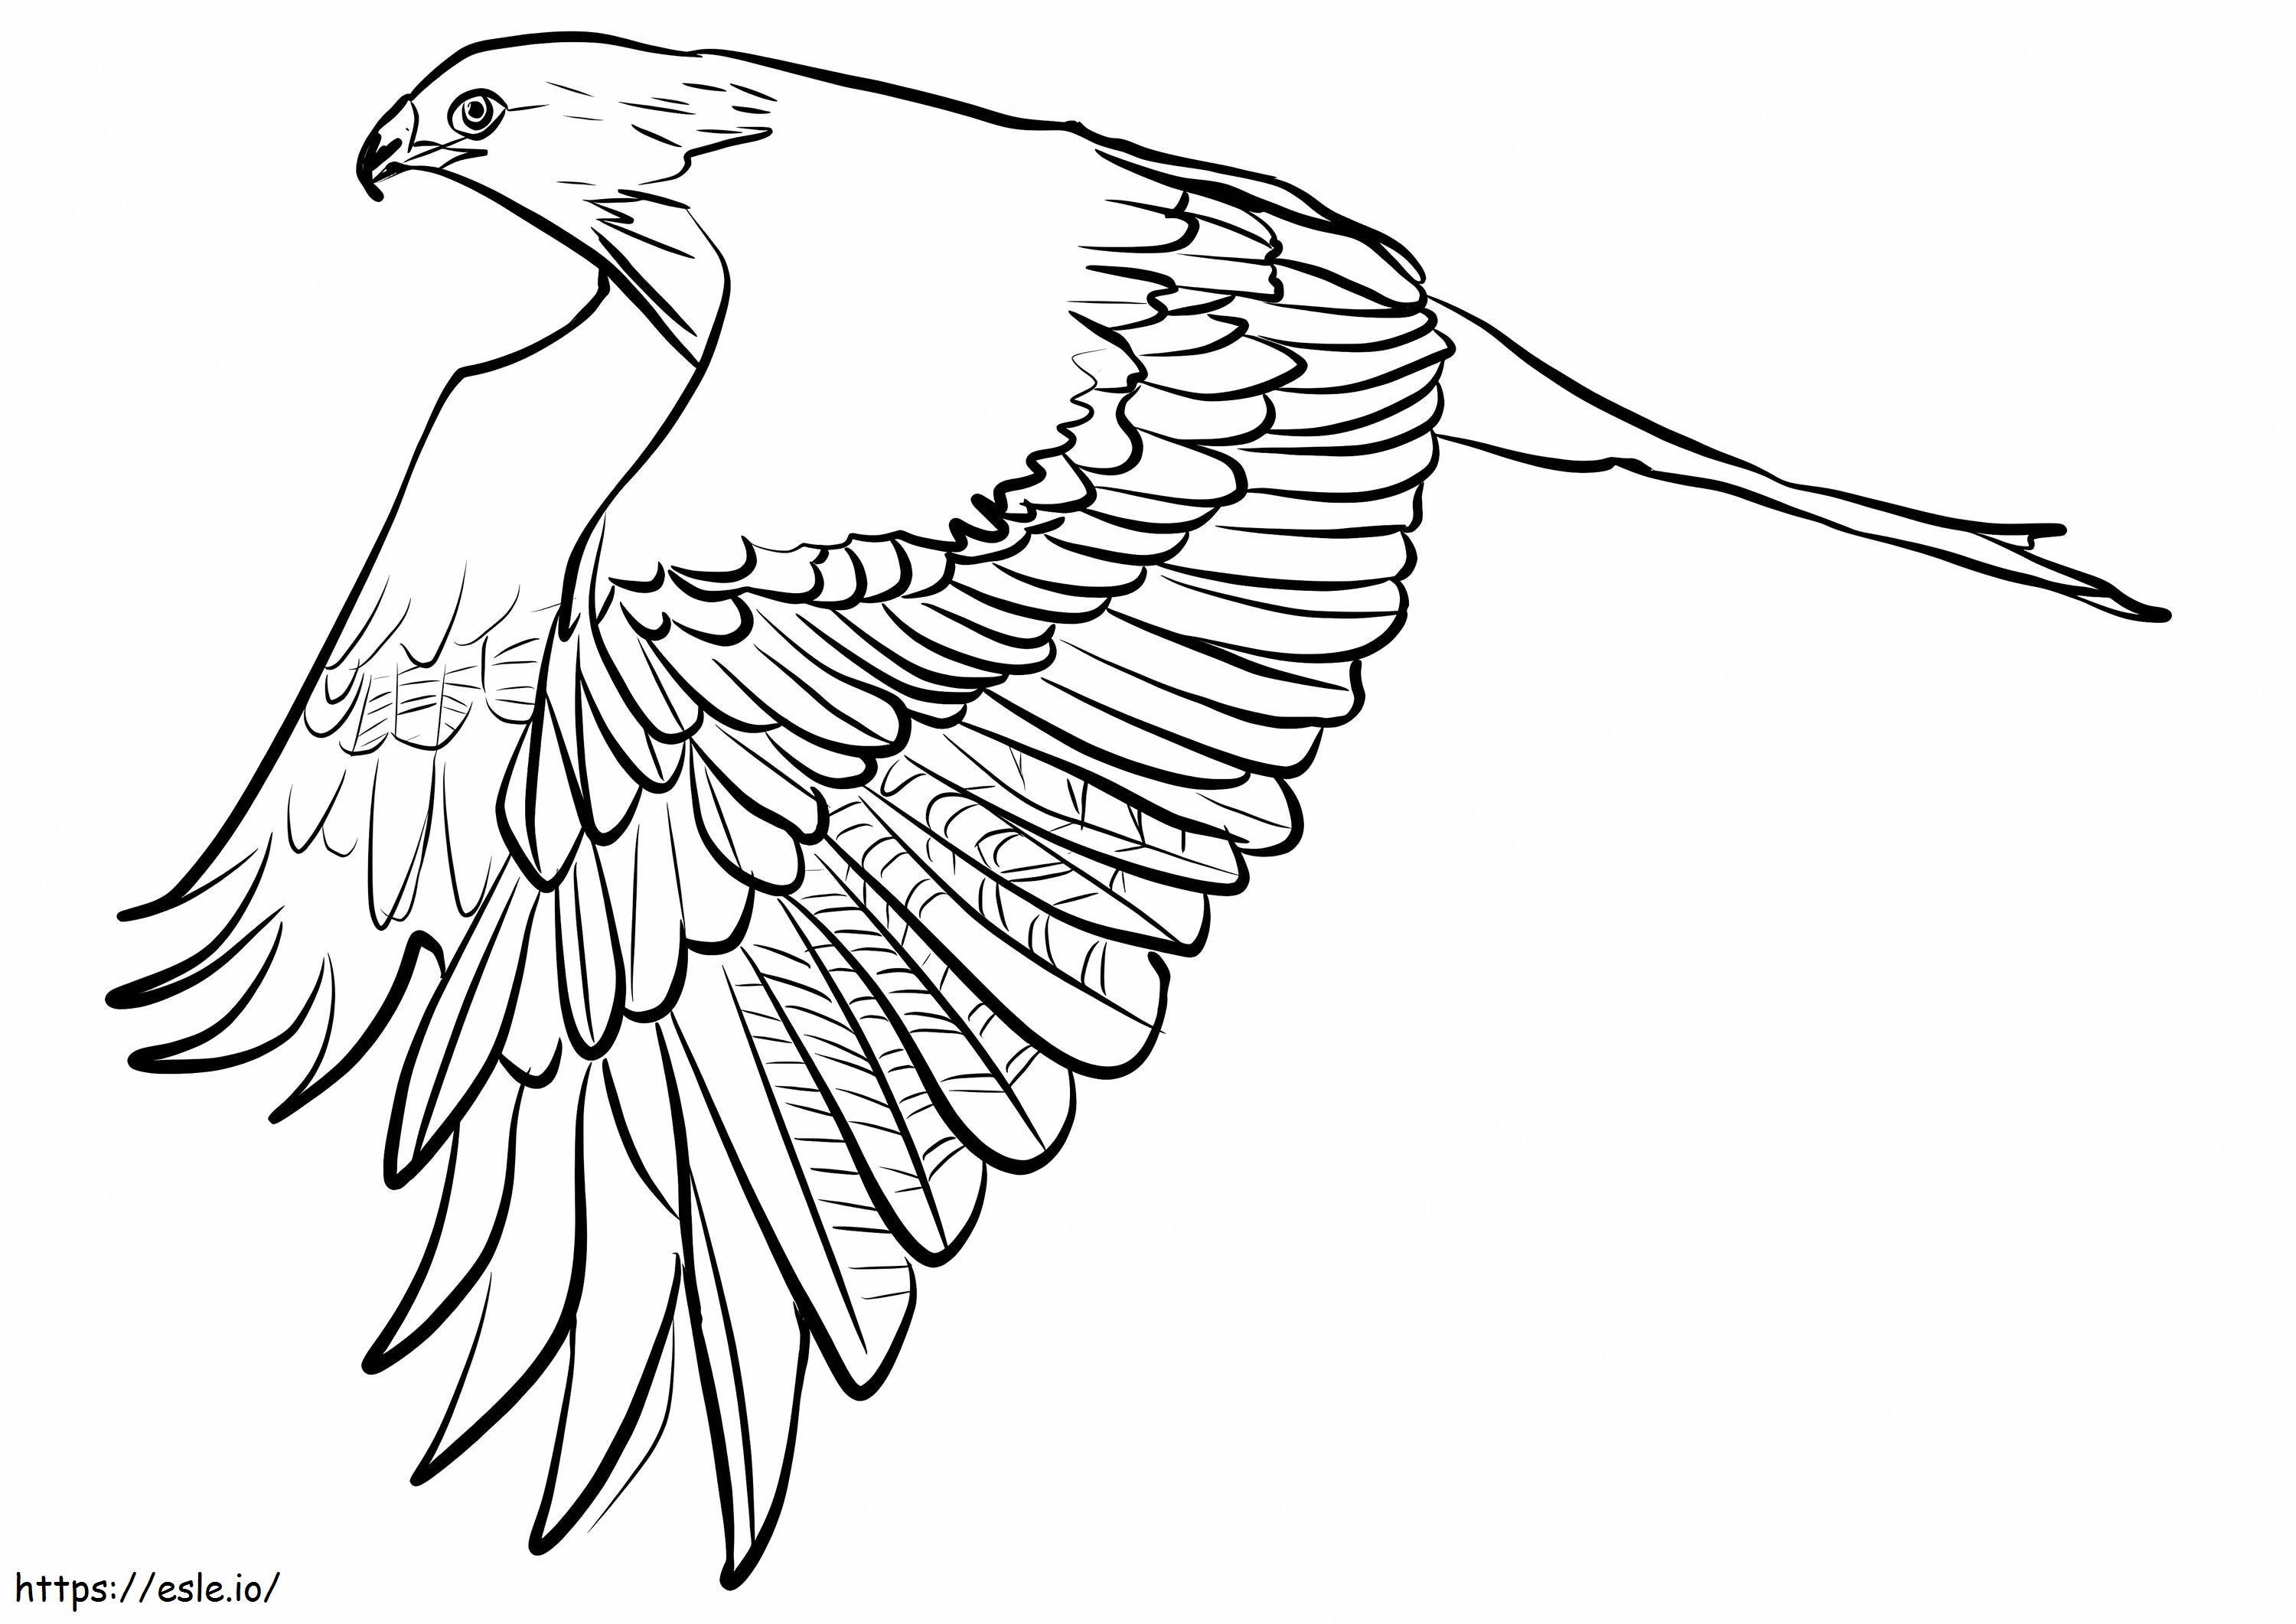 Red Kite coloring page